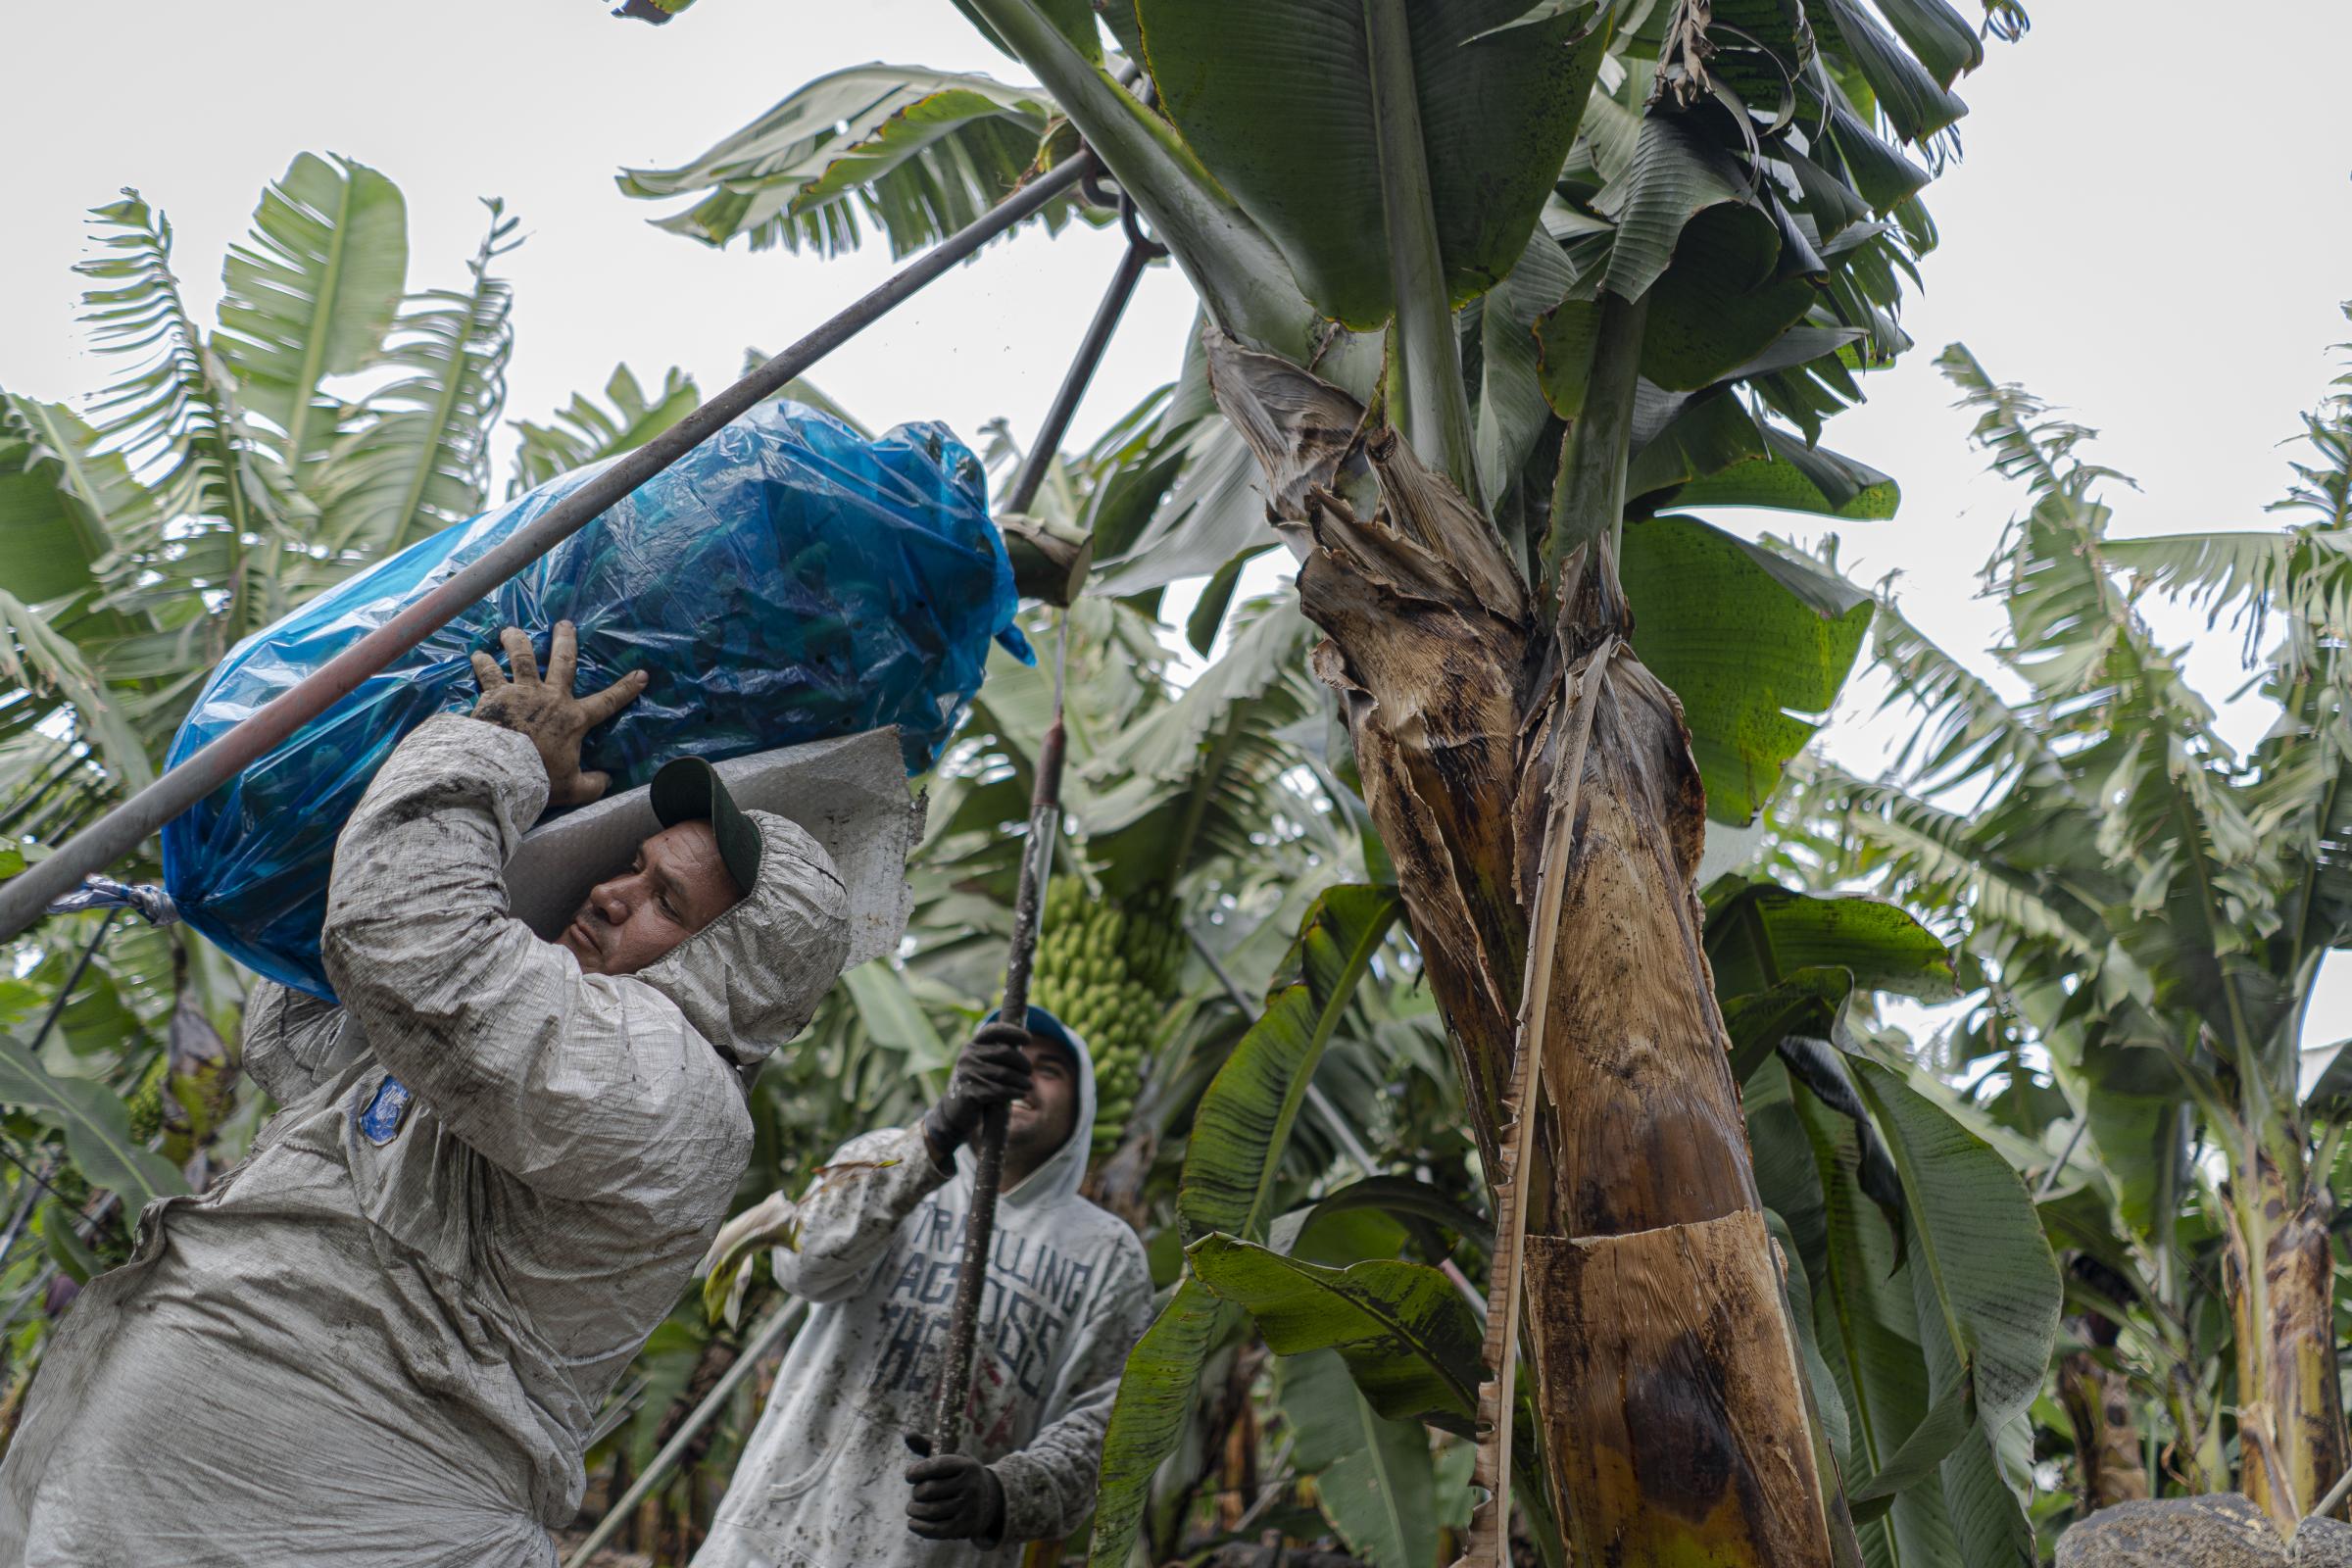 Jorge (right) cuts a bunch of bananas and Omelio (left) picks them up to carry them on his...